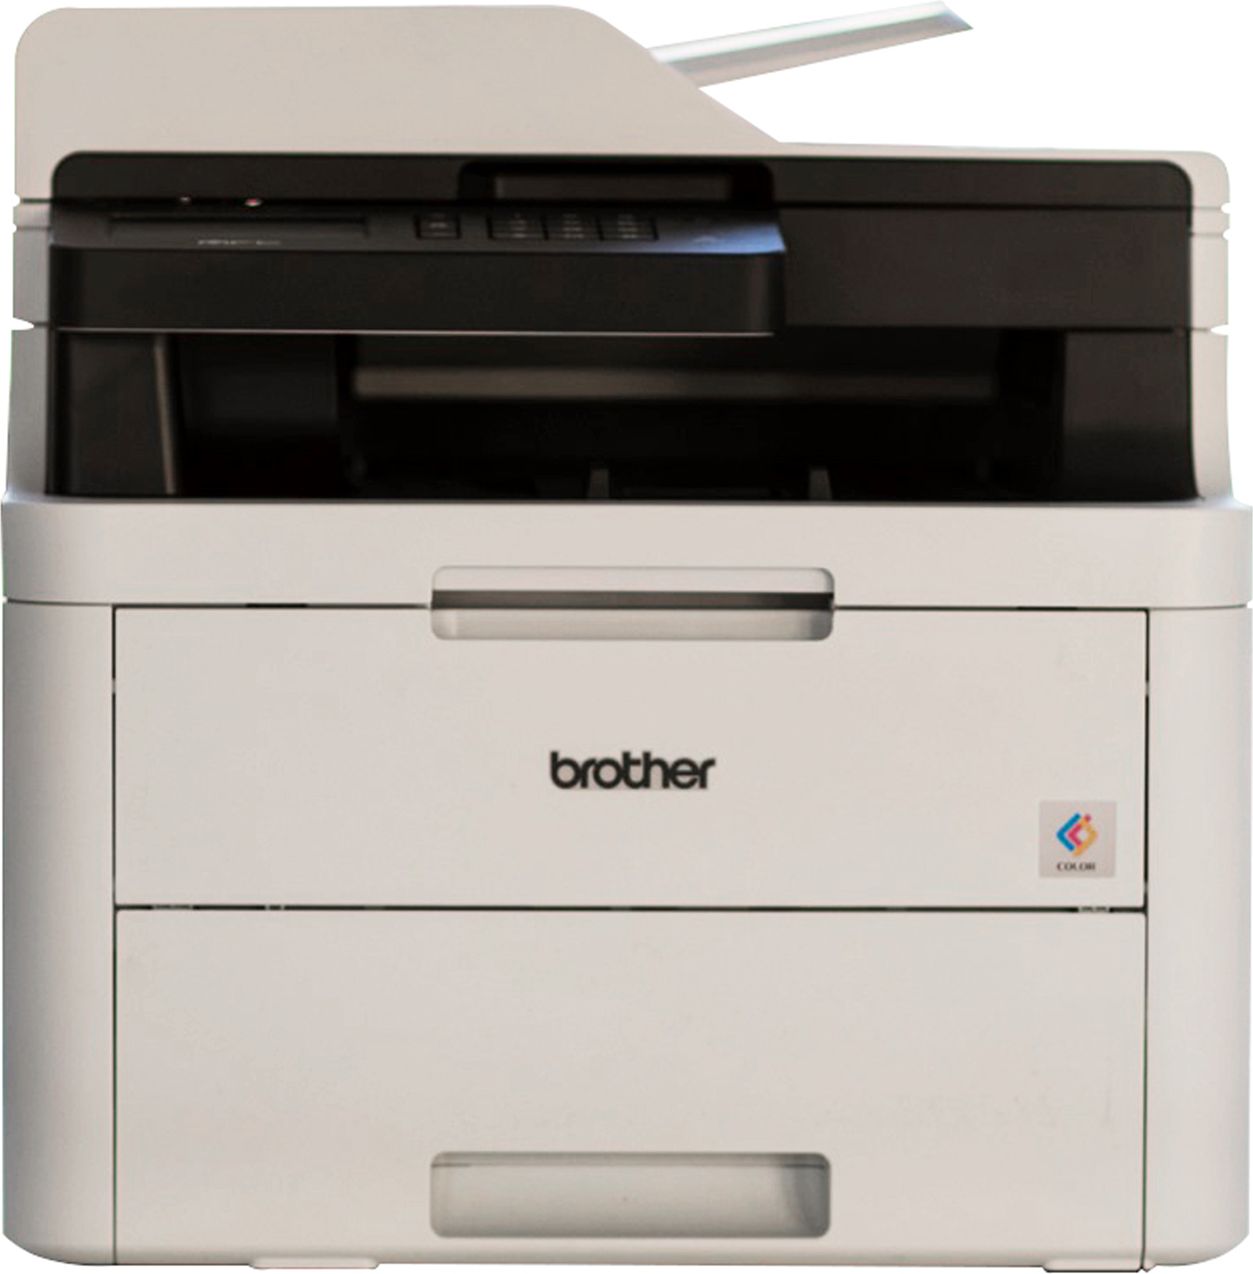 Brother MFCL3710CW Laser Printer - Grey